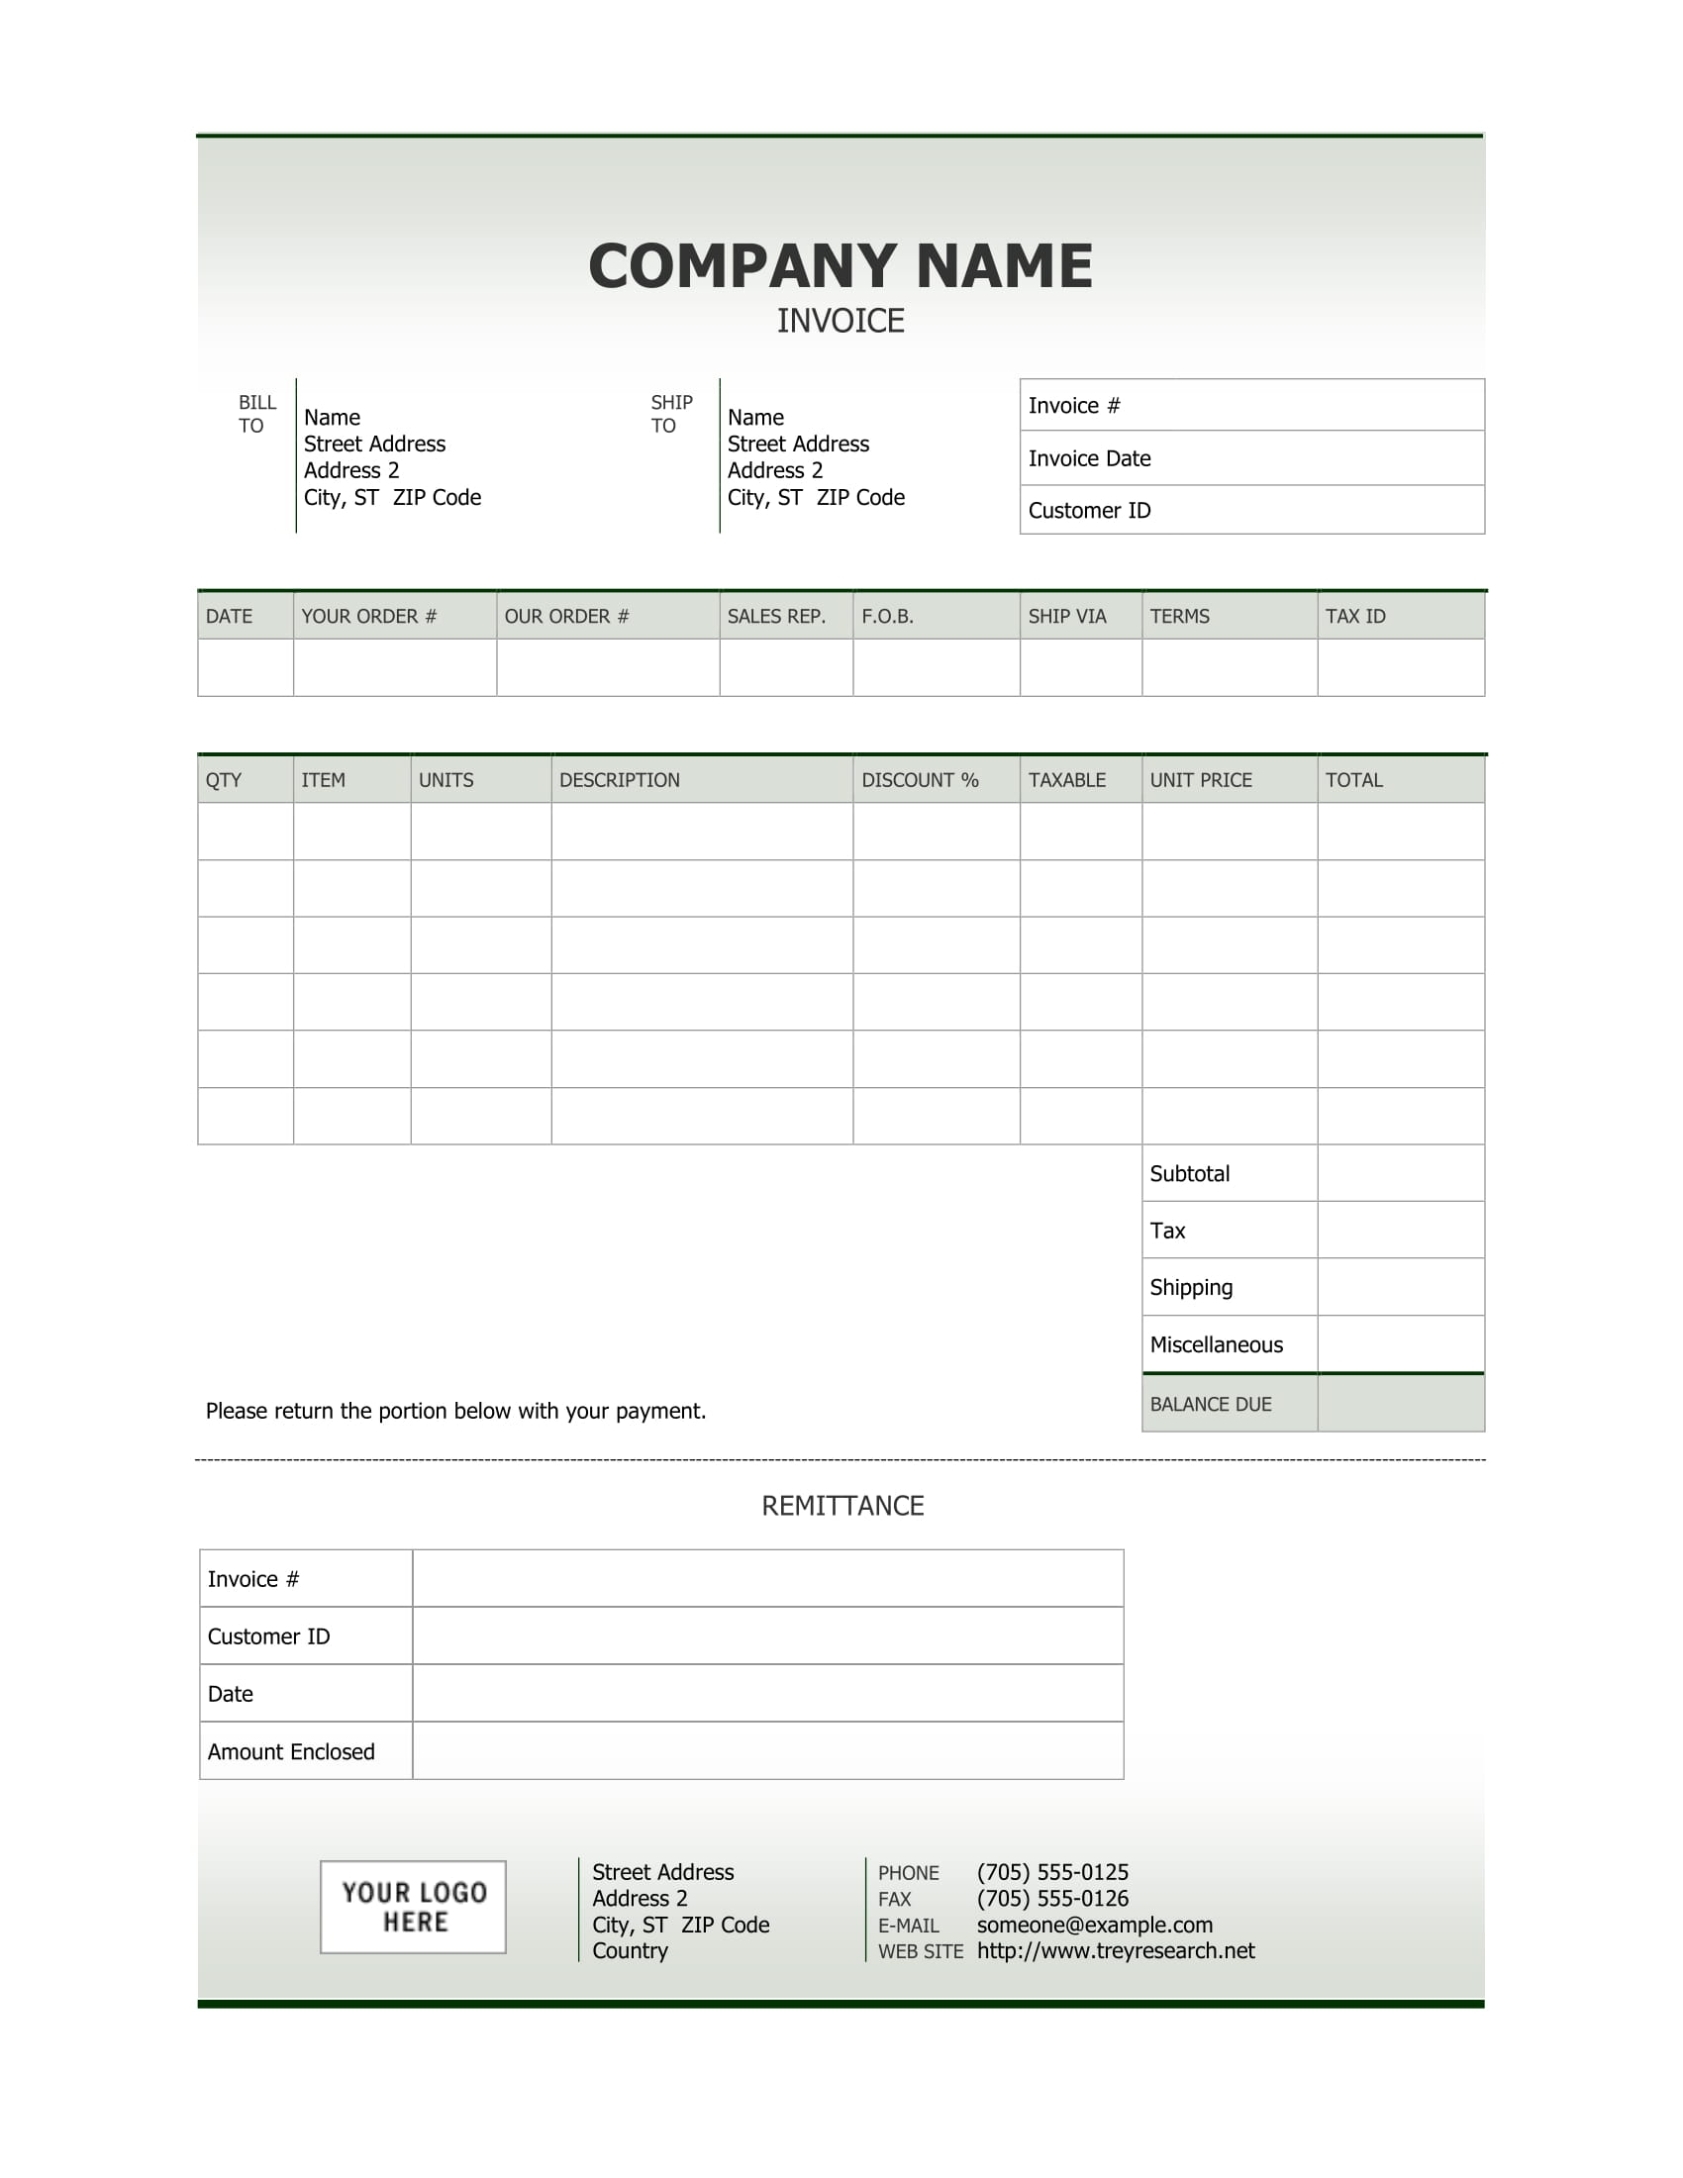 How To Create An Invoice In Word: A Step By Step Guide Throughout How To Write A Invoice Template